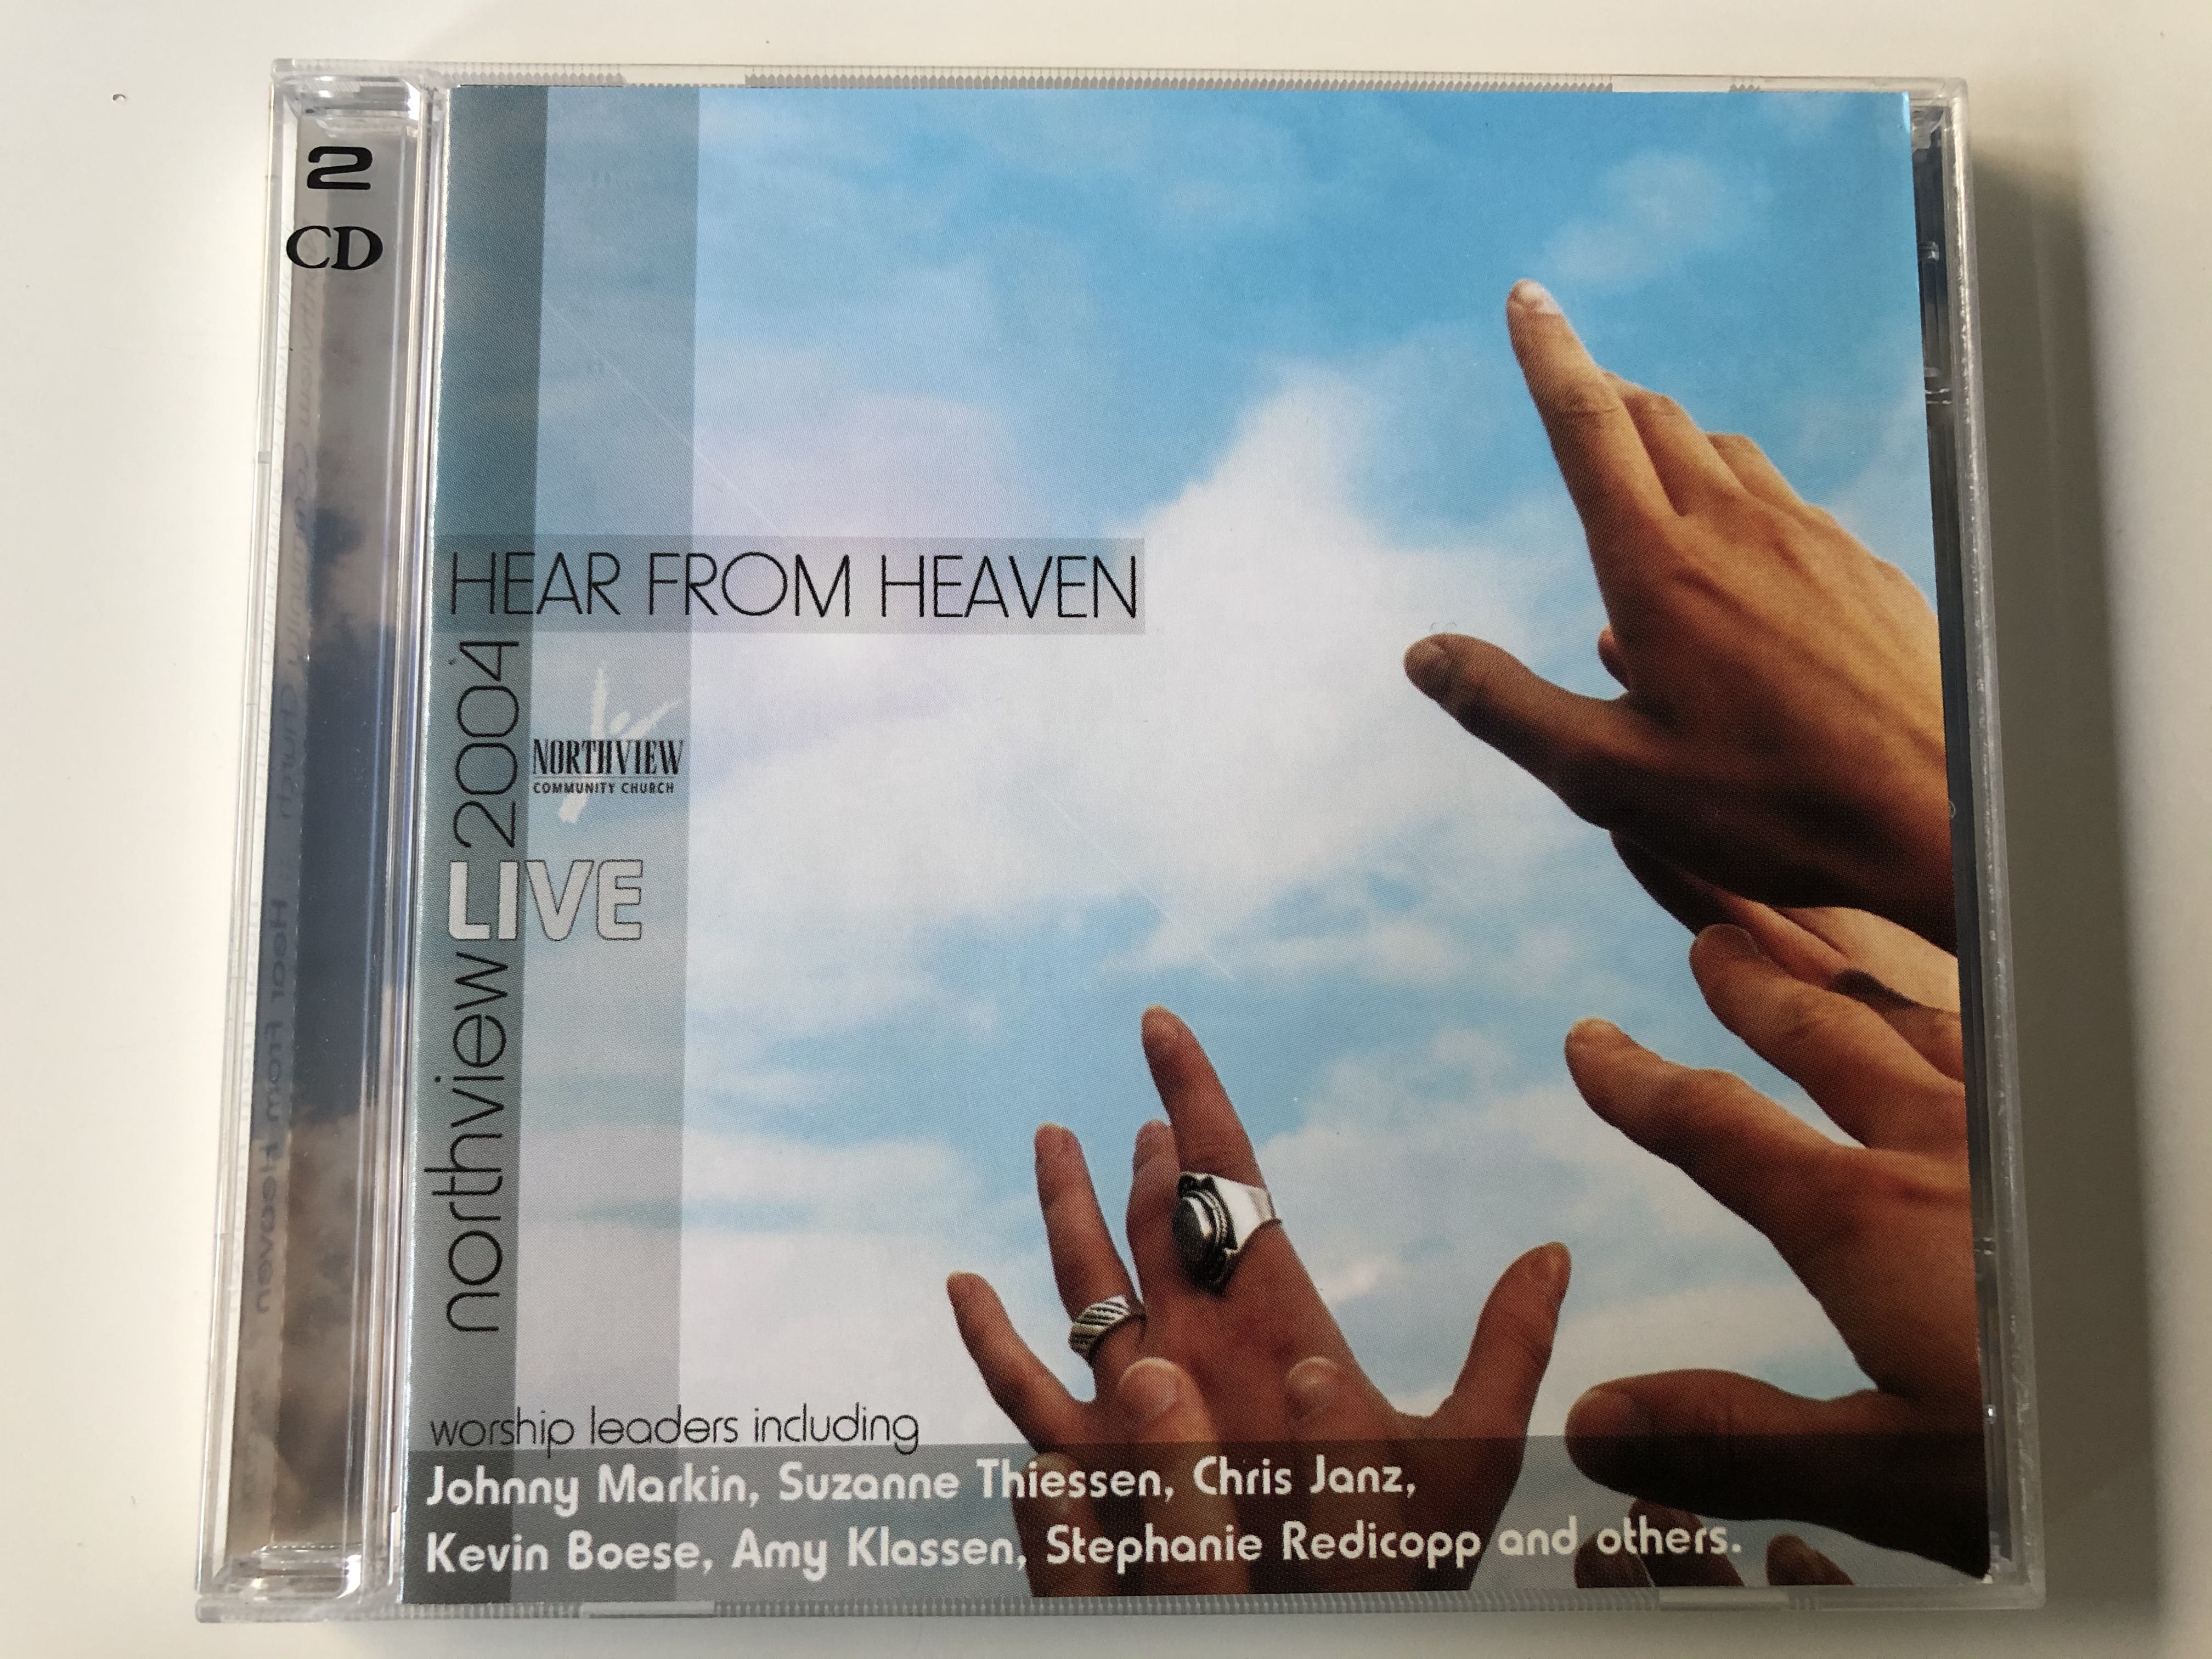 hear-from-heaven-northview-live-2004-worship-leaders-including-johnny-markin-suzanne-thiessen-chris-janz-kevin-boese-amy-klassen-stephanie-redicopp-and-others-northview-community-churc-1-.jpg